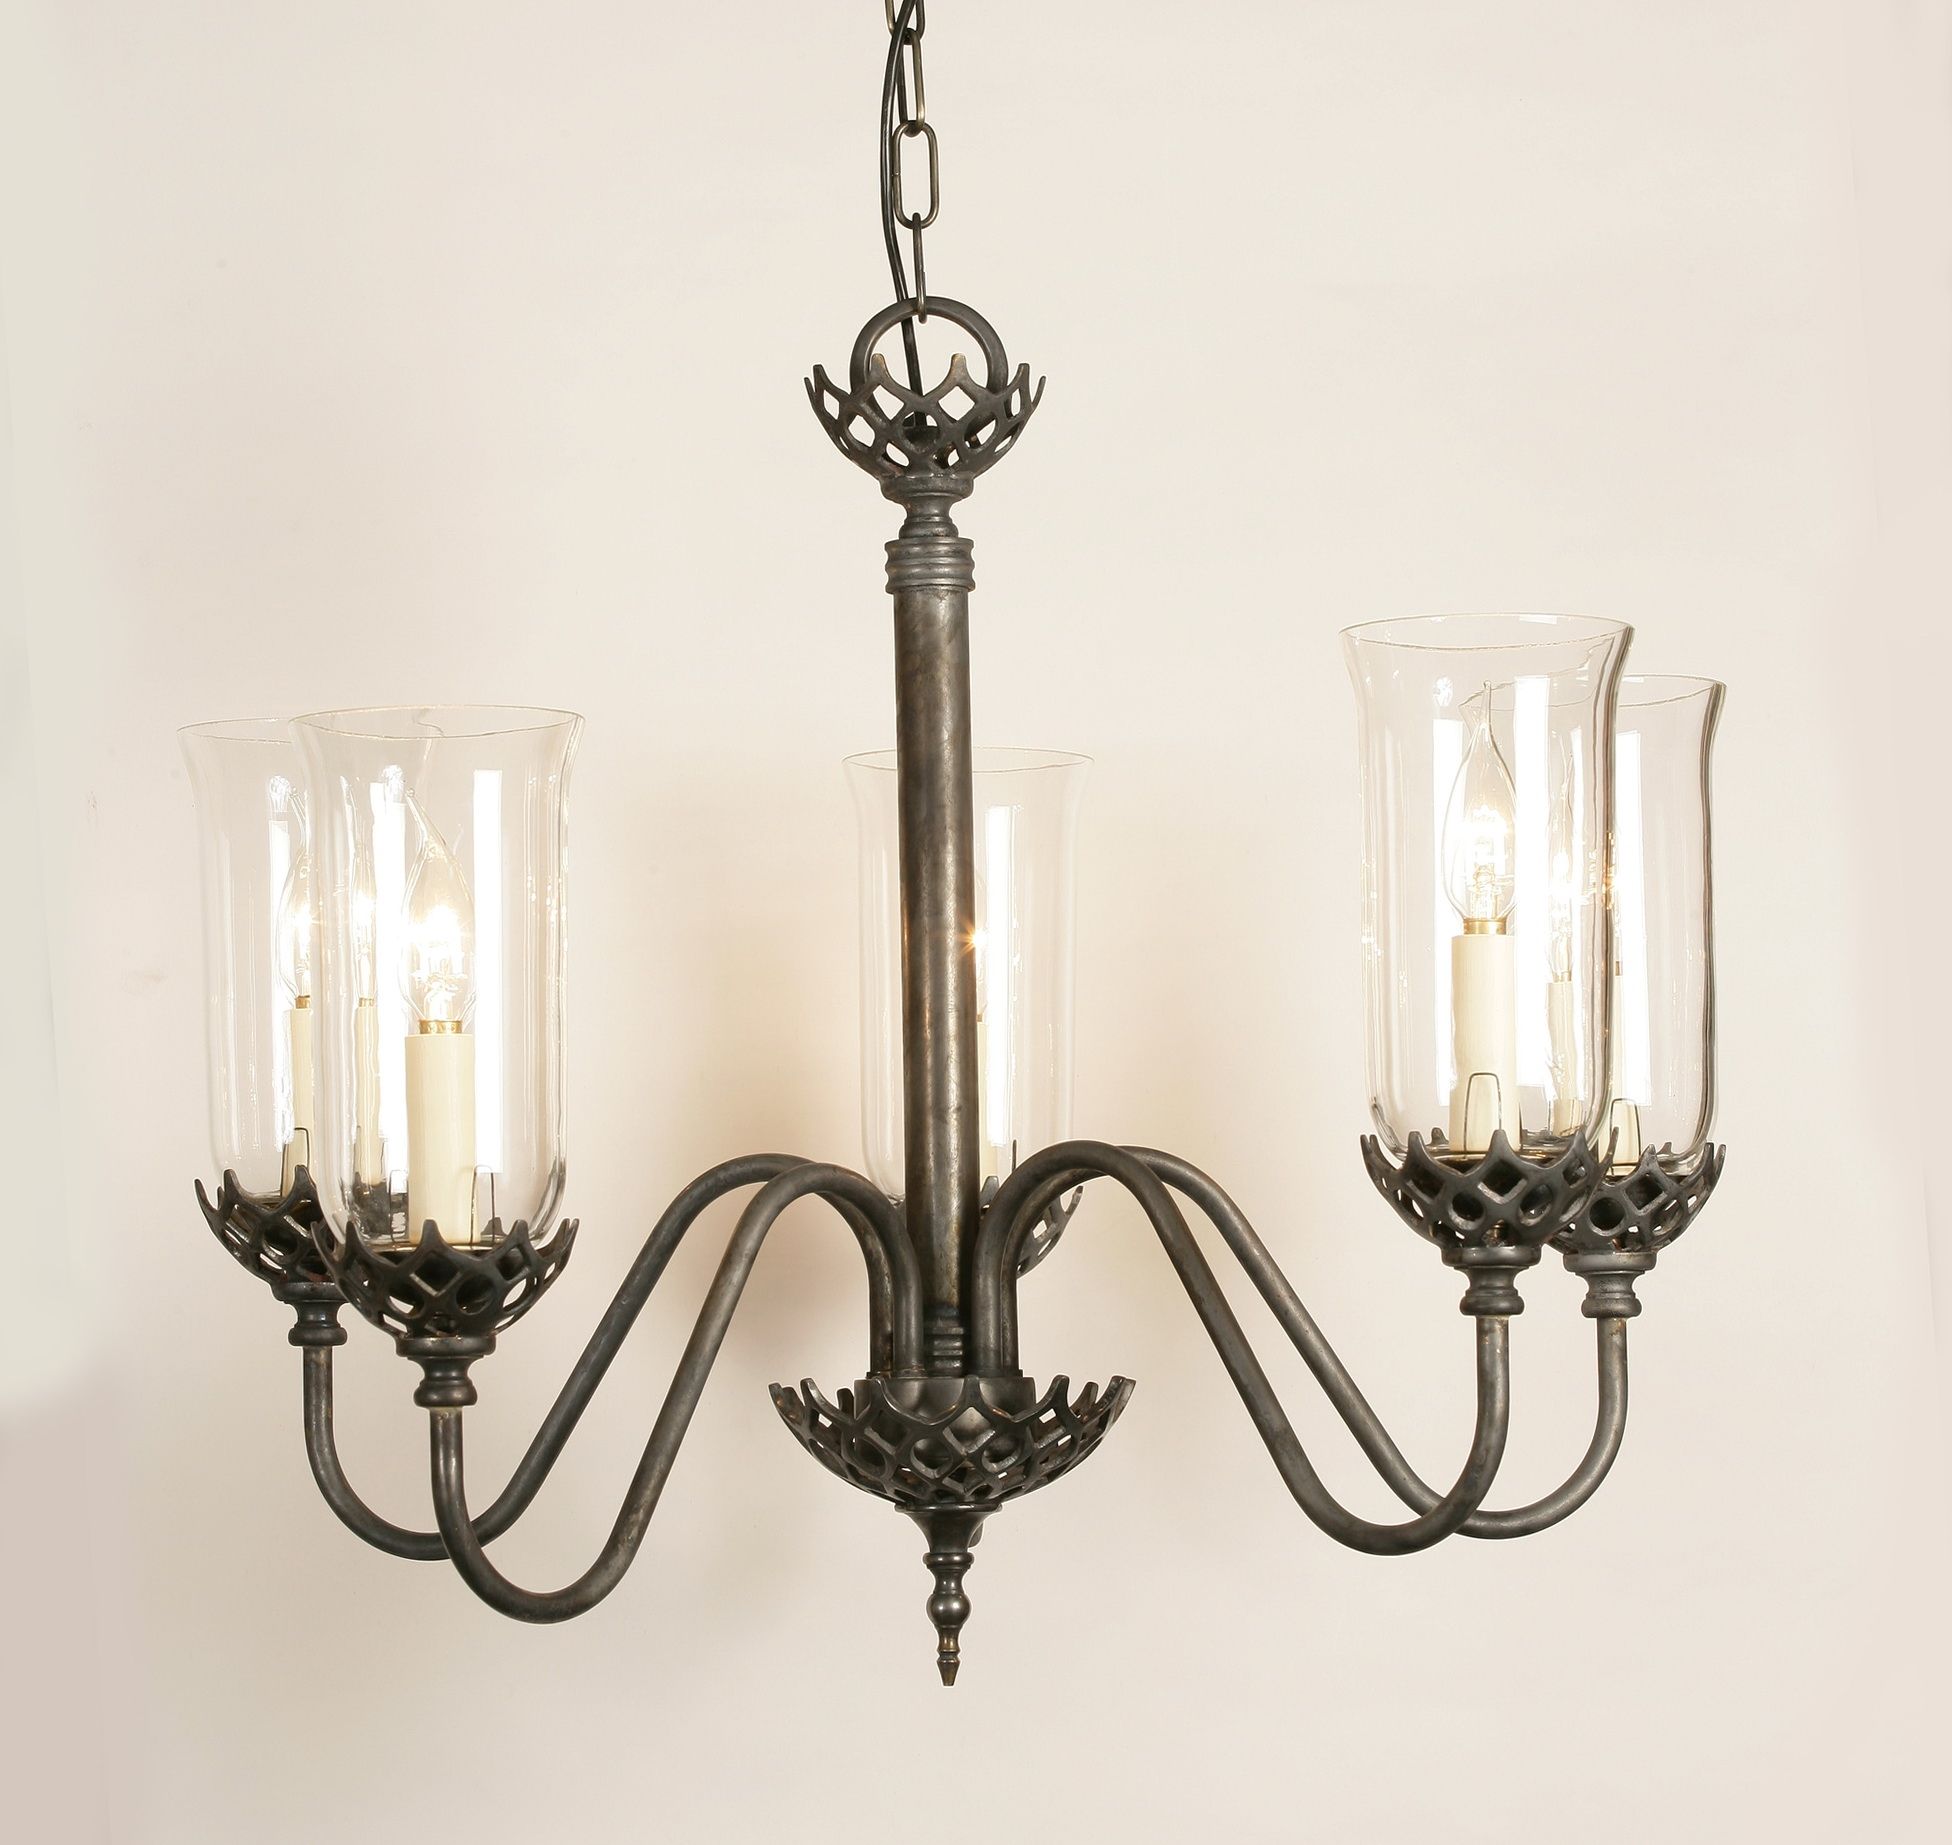 Lighting Wonderful Candle Chandelier Non Electric For Modern Intended For Hanging Candelabra Chandeliers (View 24 of 25)